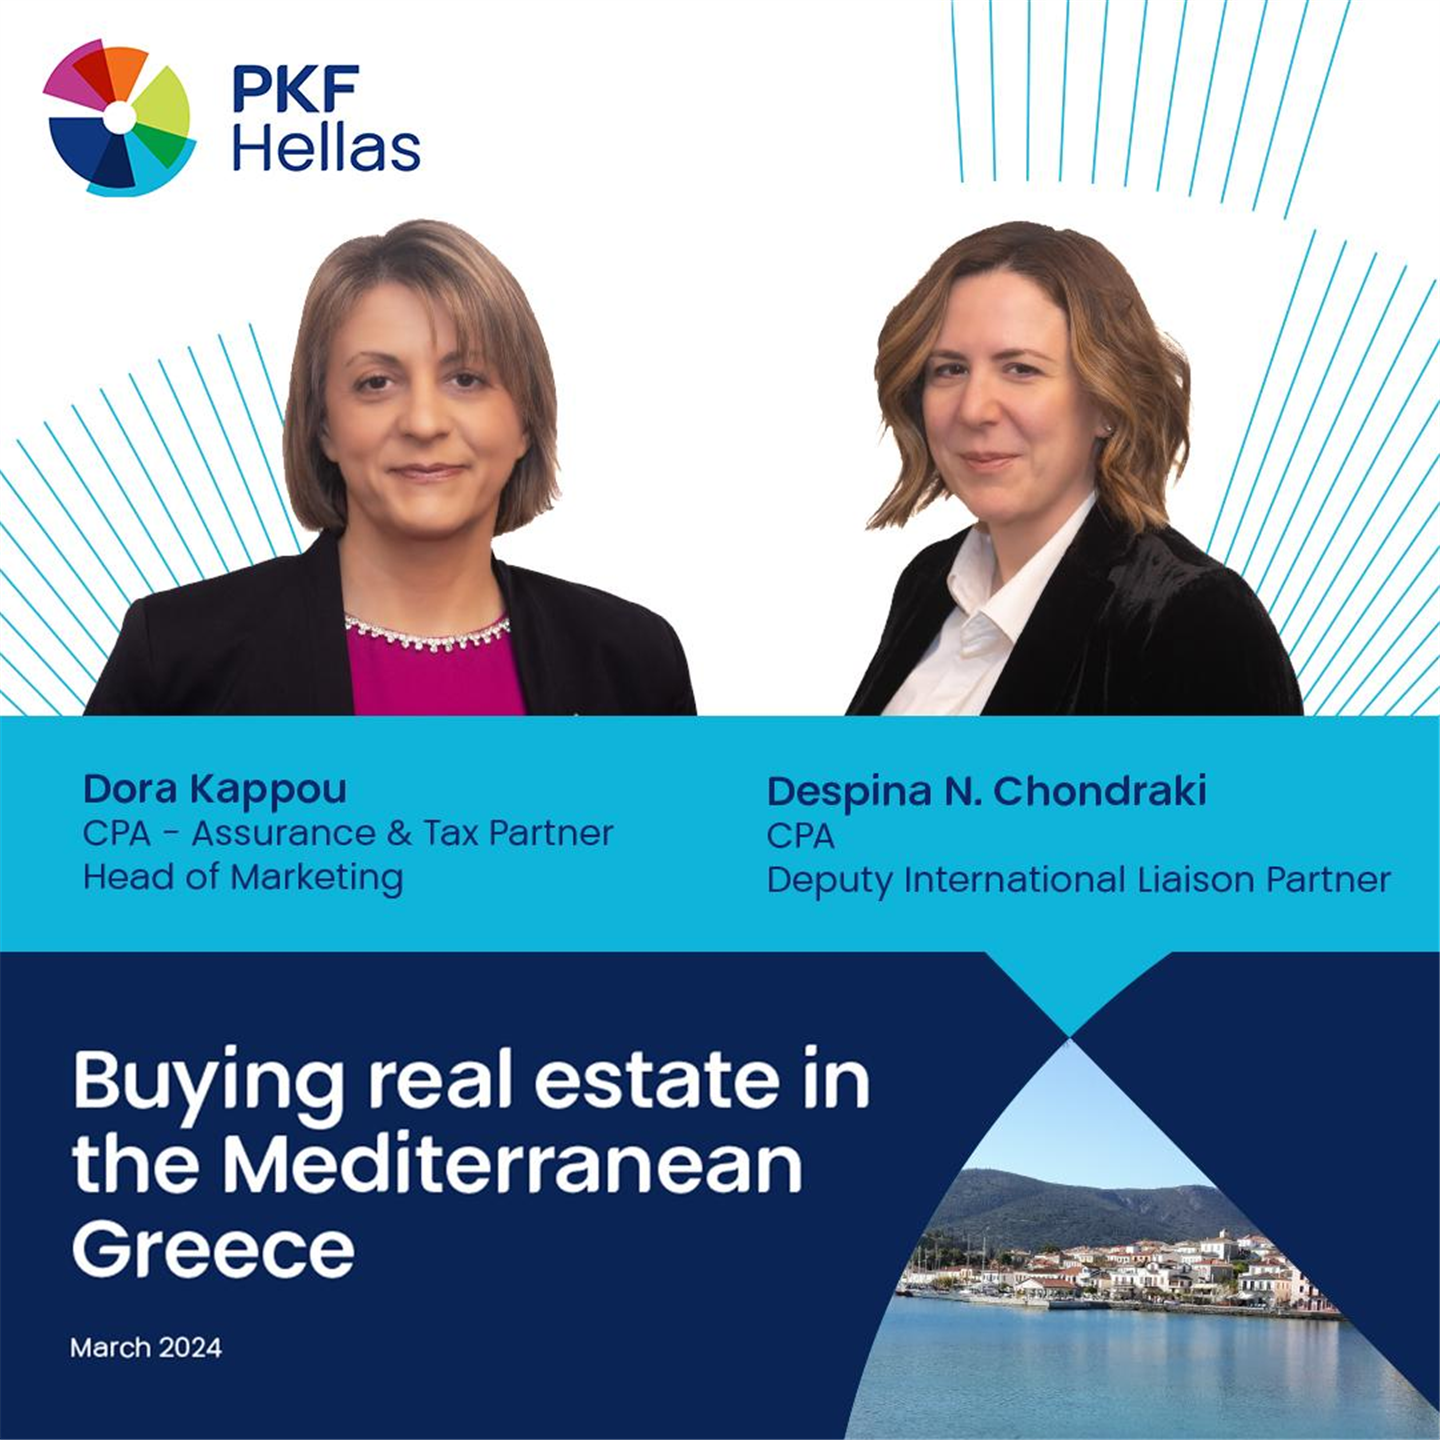 Webinar PKF Network on the topic “Buying real estate in the Mediterranean”